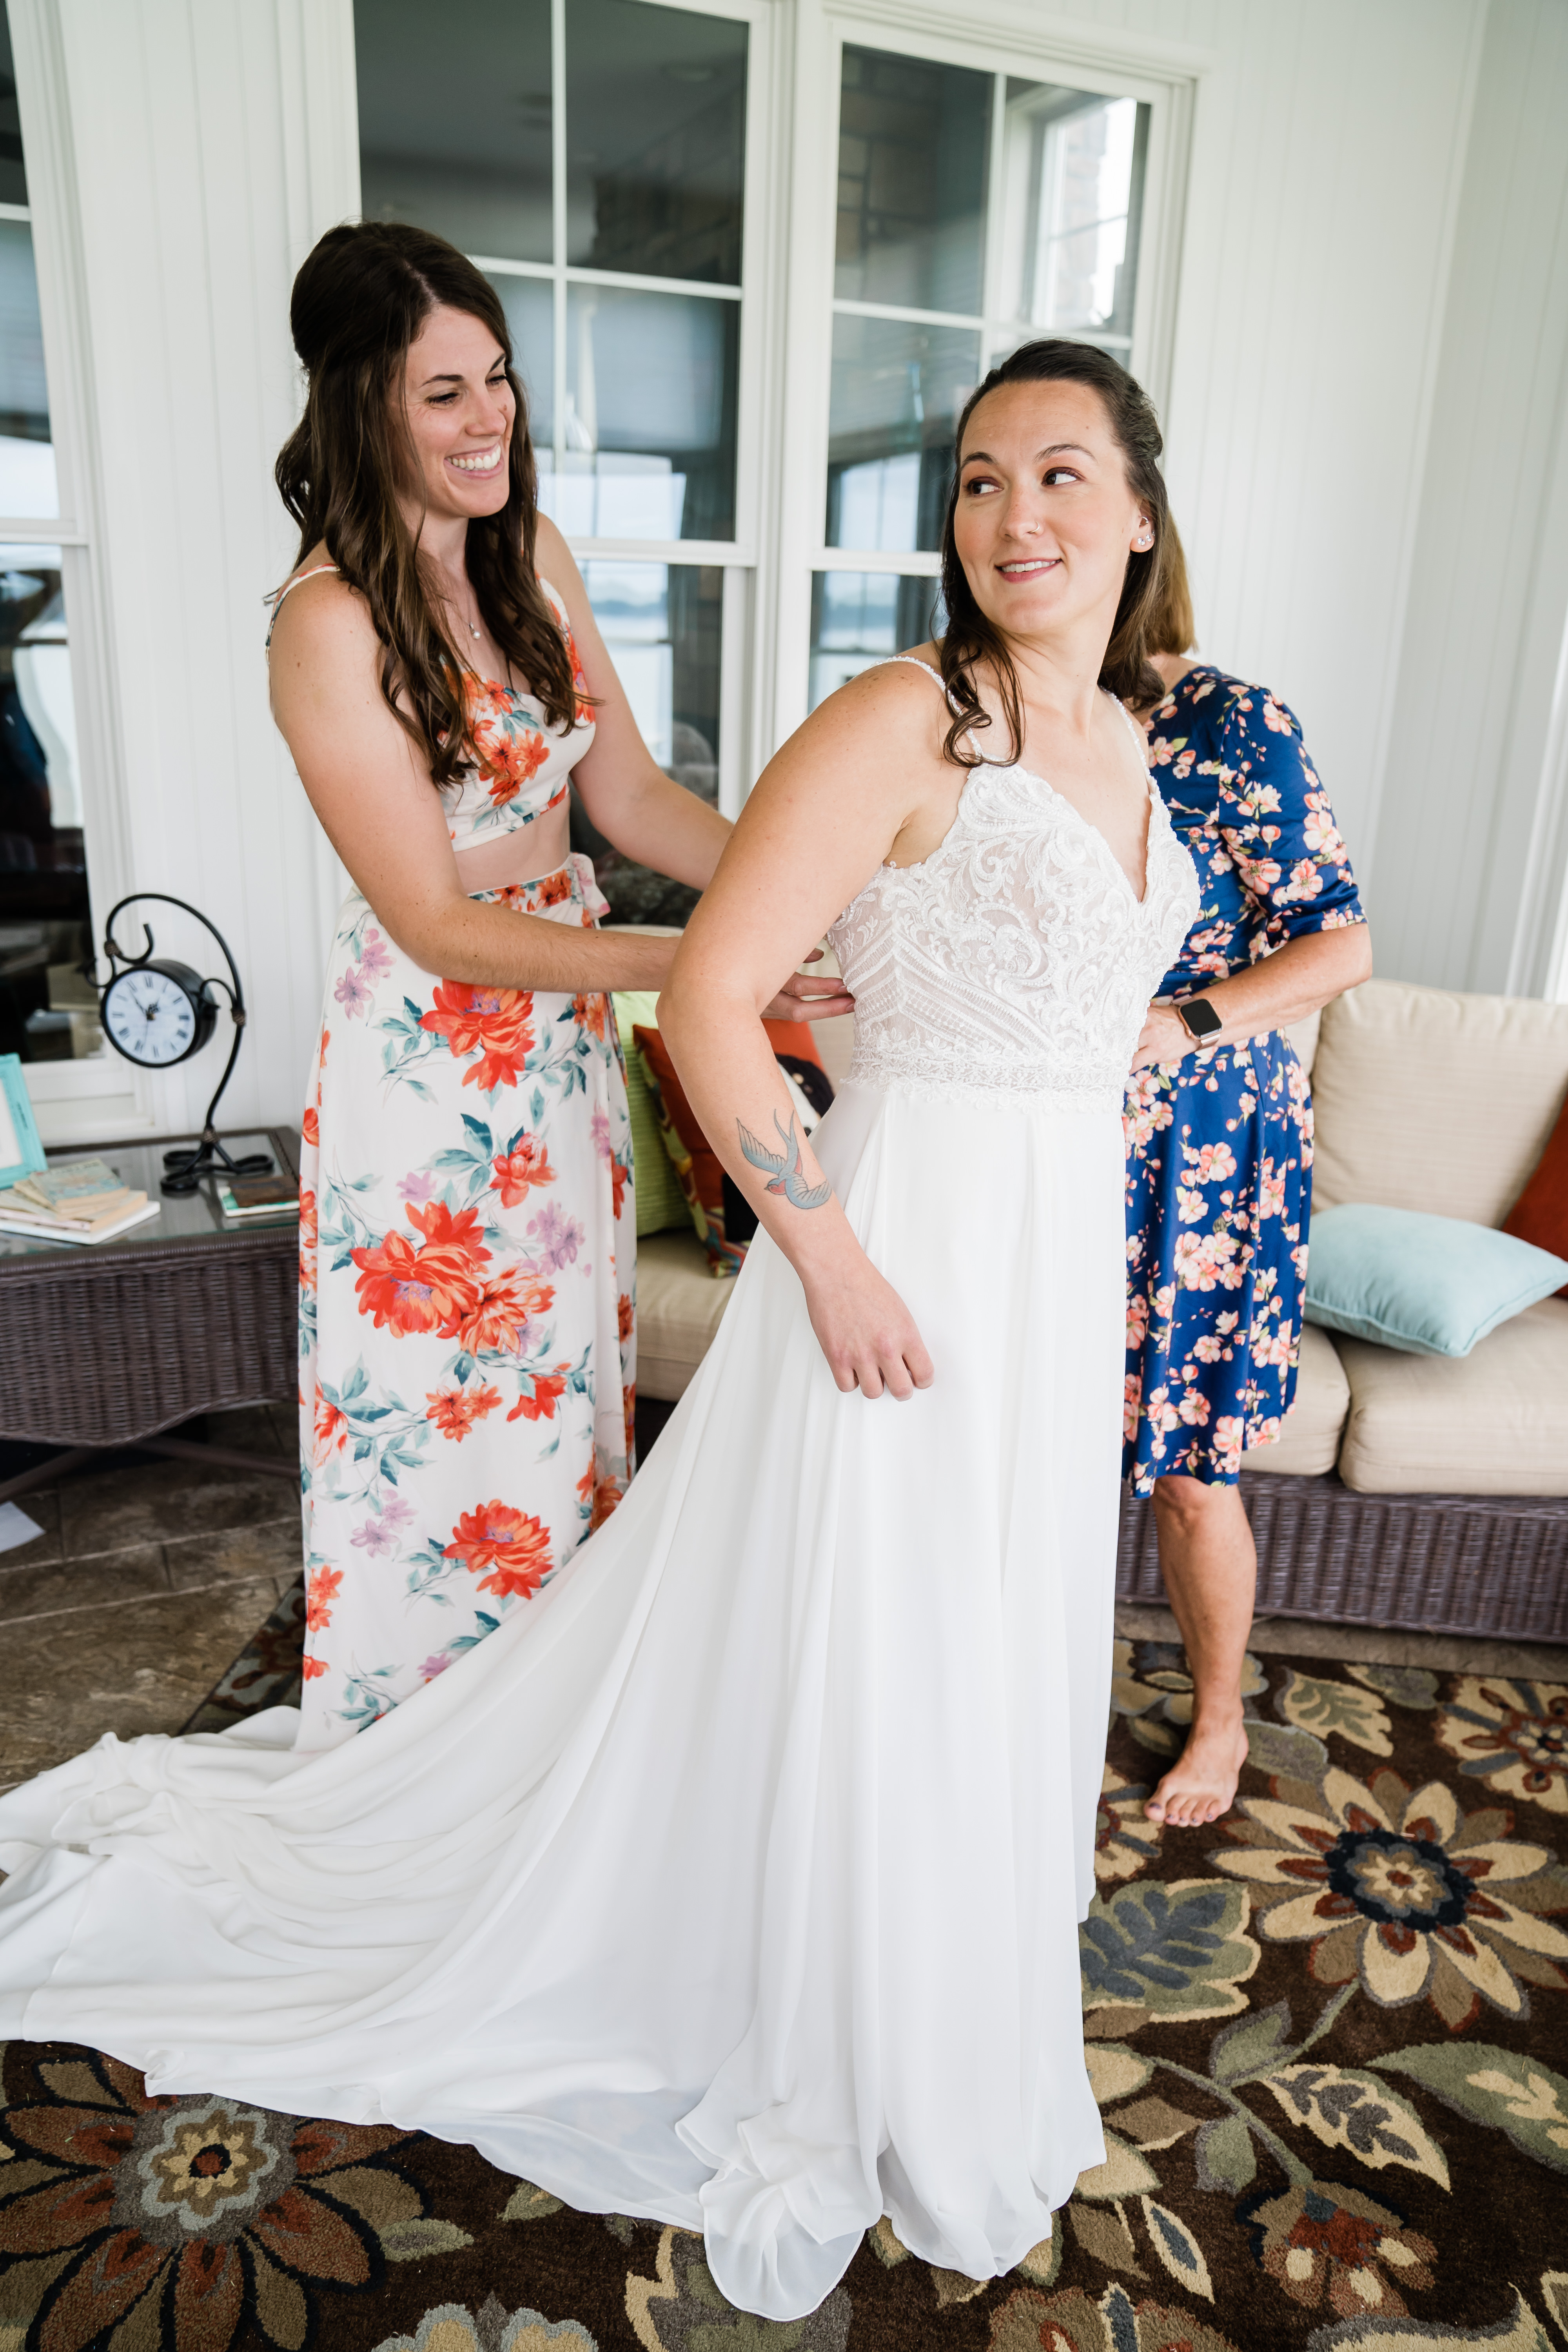 bride smiling while mother and sister help her get ready